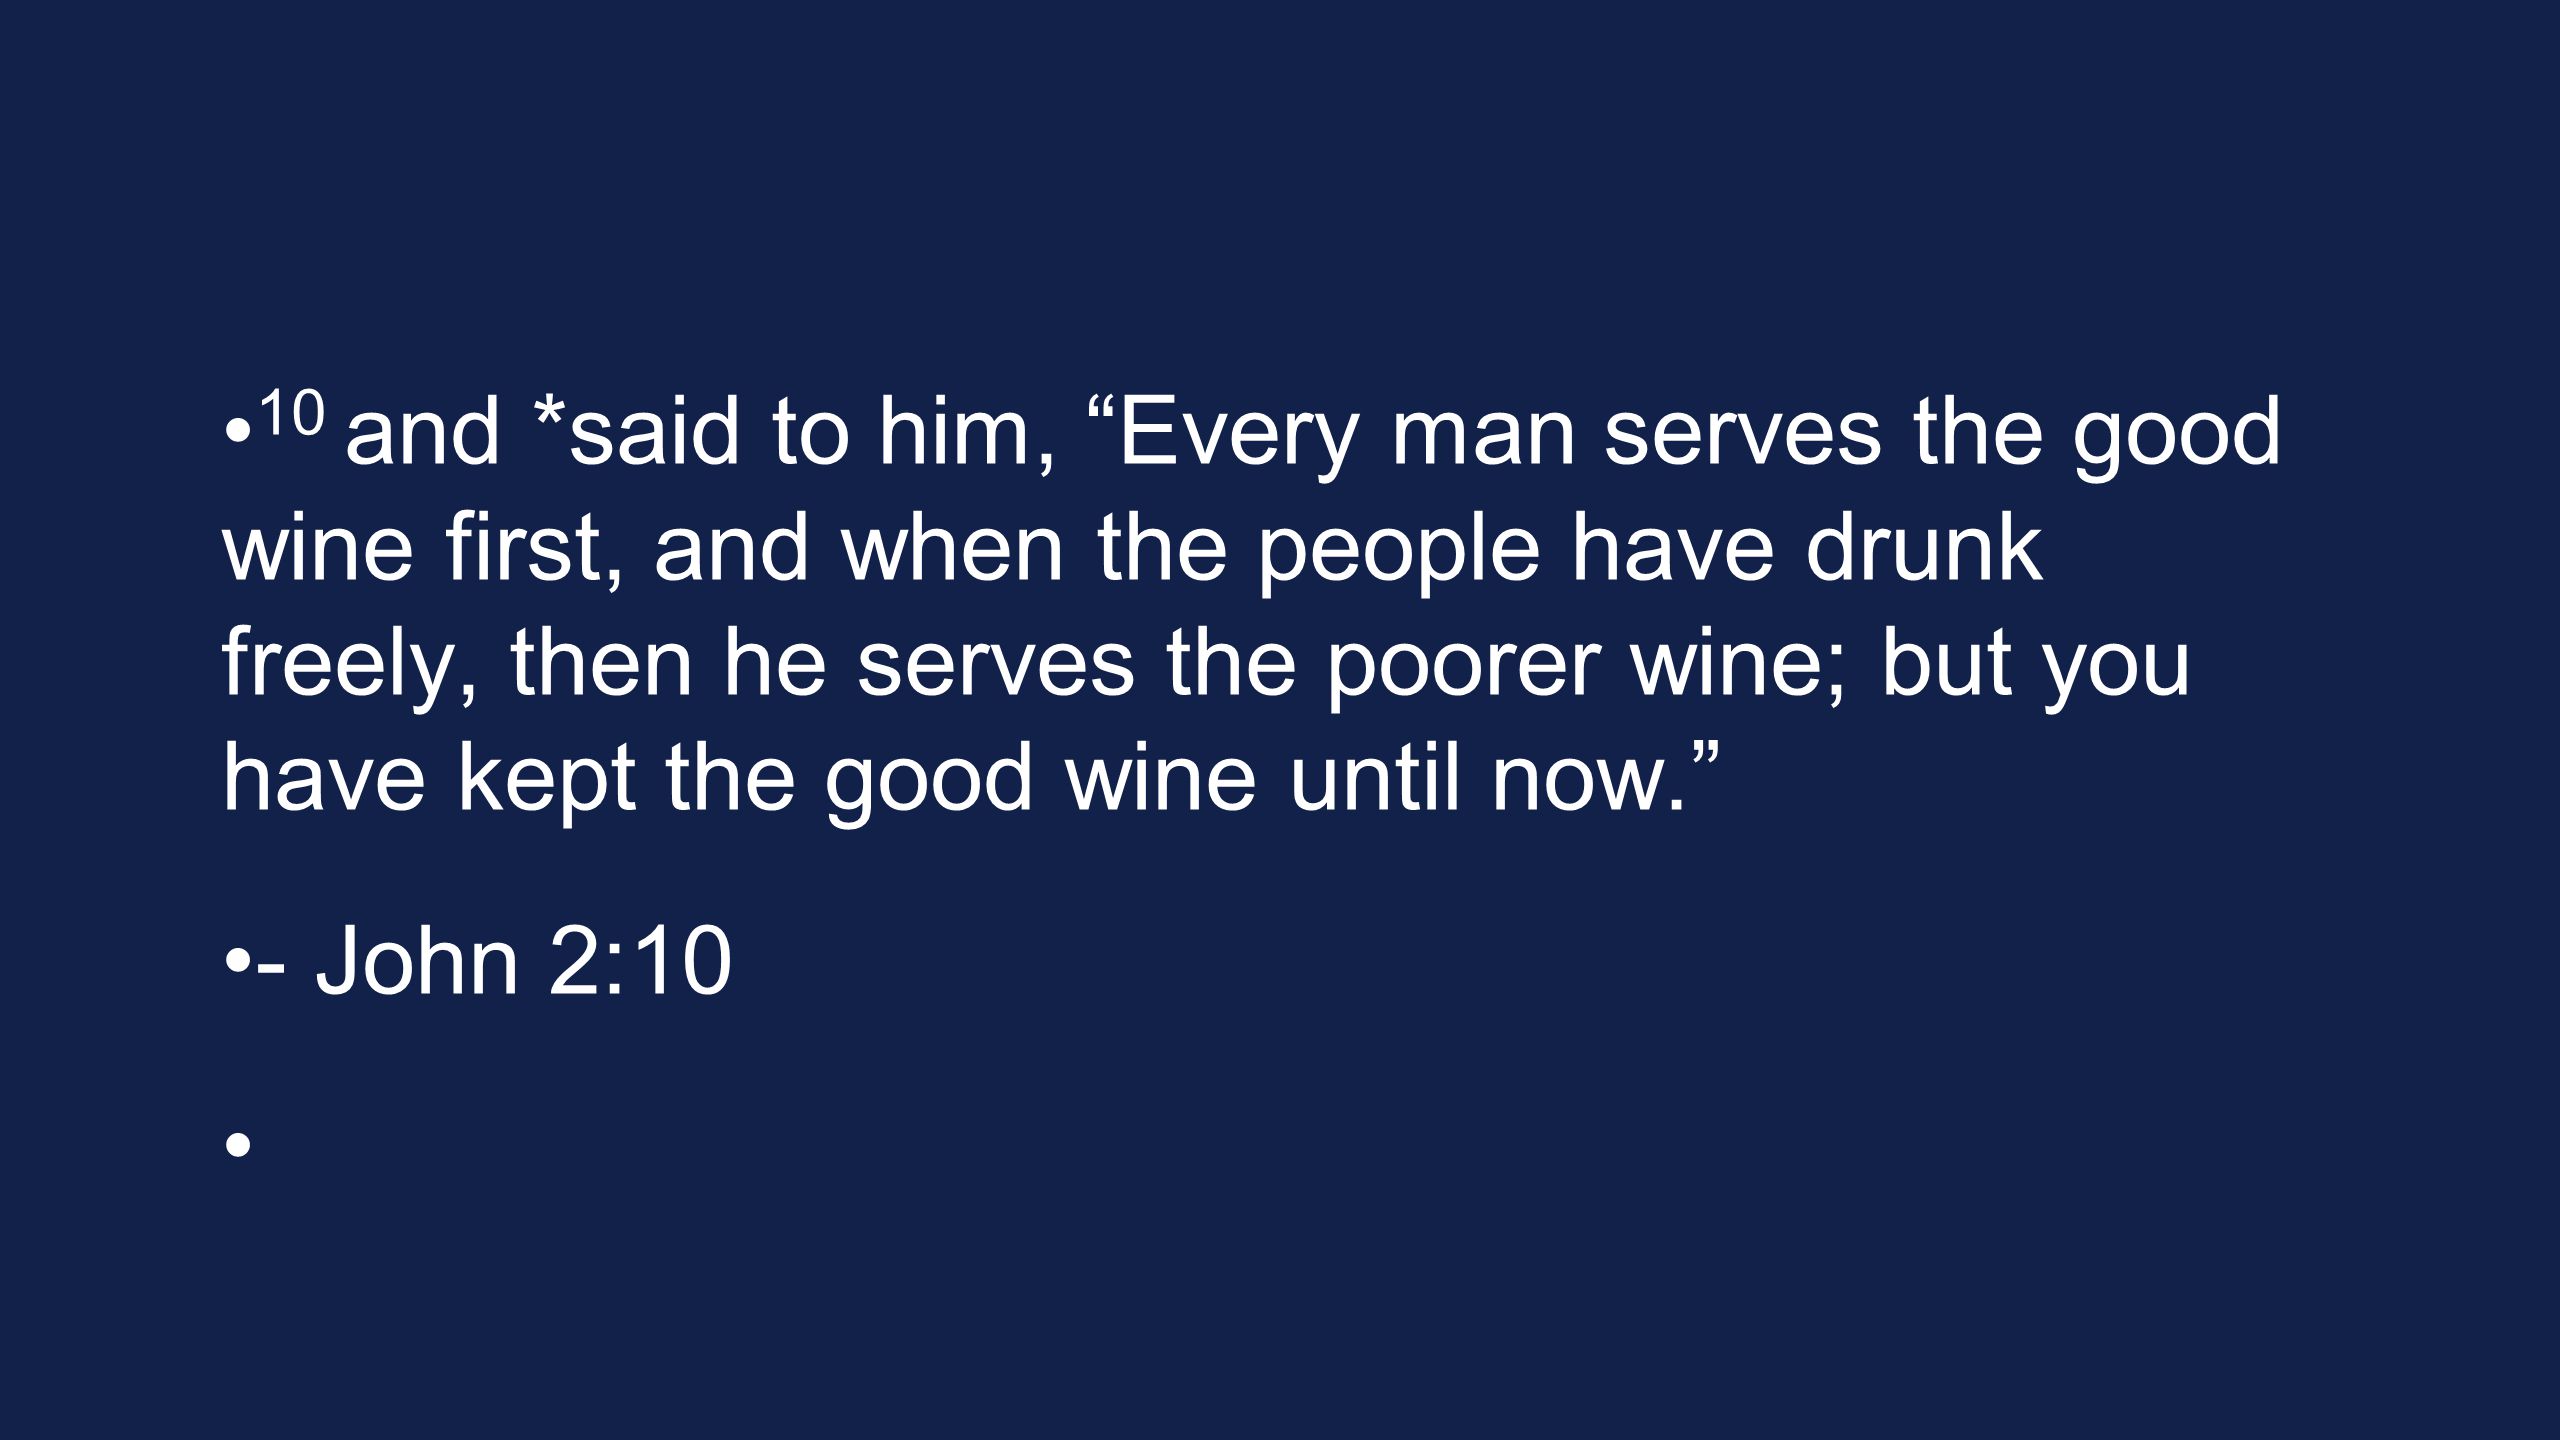 10 and *said to him, Every man serves the good wine first, and when the people have drunk freely, then he serves the poorer wine; but you have kept the good wine until now.